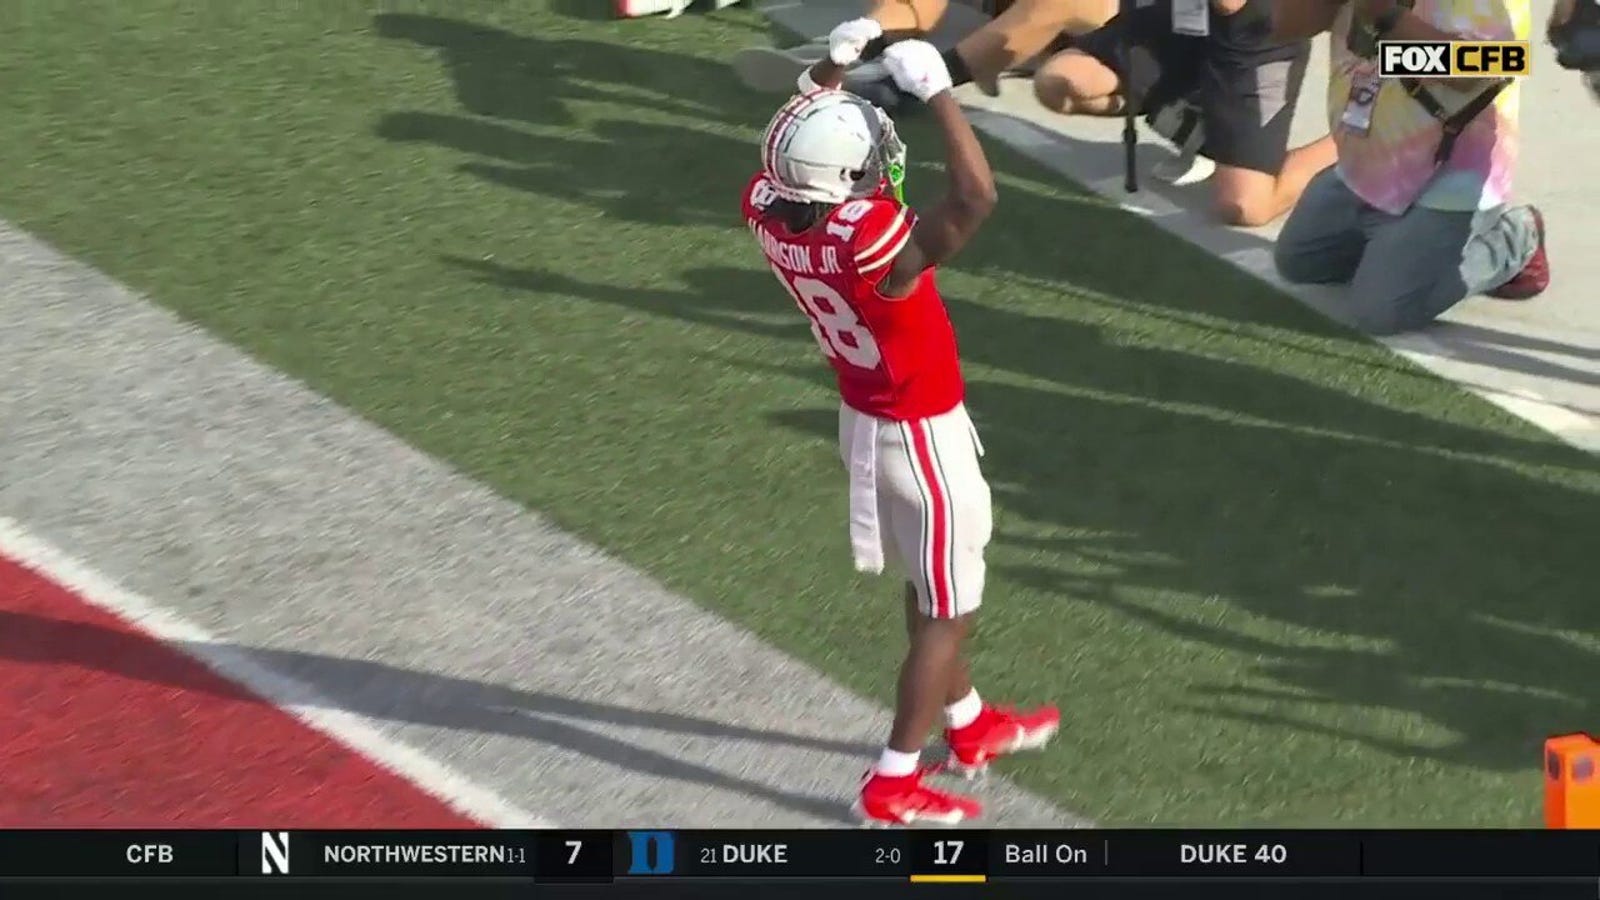 Kyle McCord links up with Marvin Harrison Jr. on a 75-yard touchdown pass, extending Ohio State's lead vs. Western Kentucky